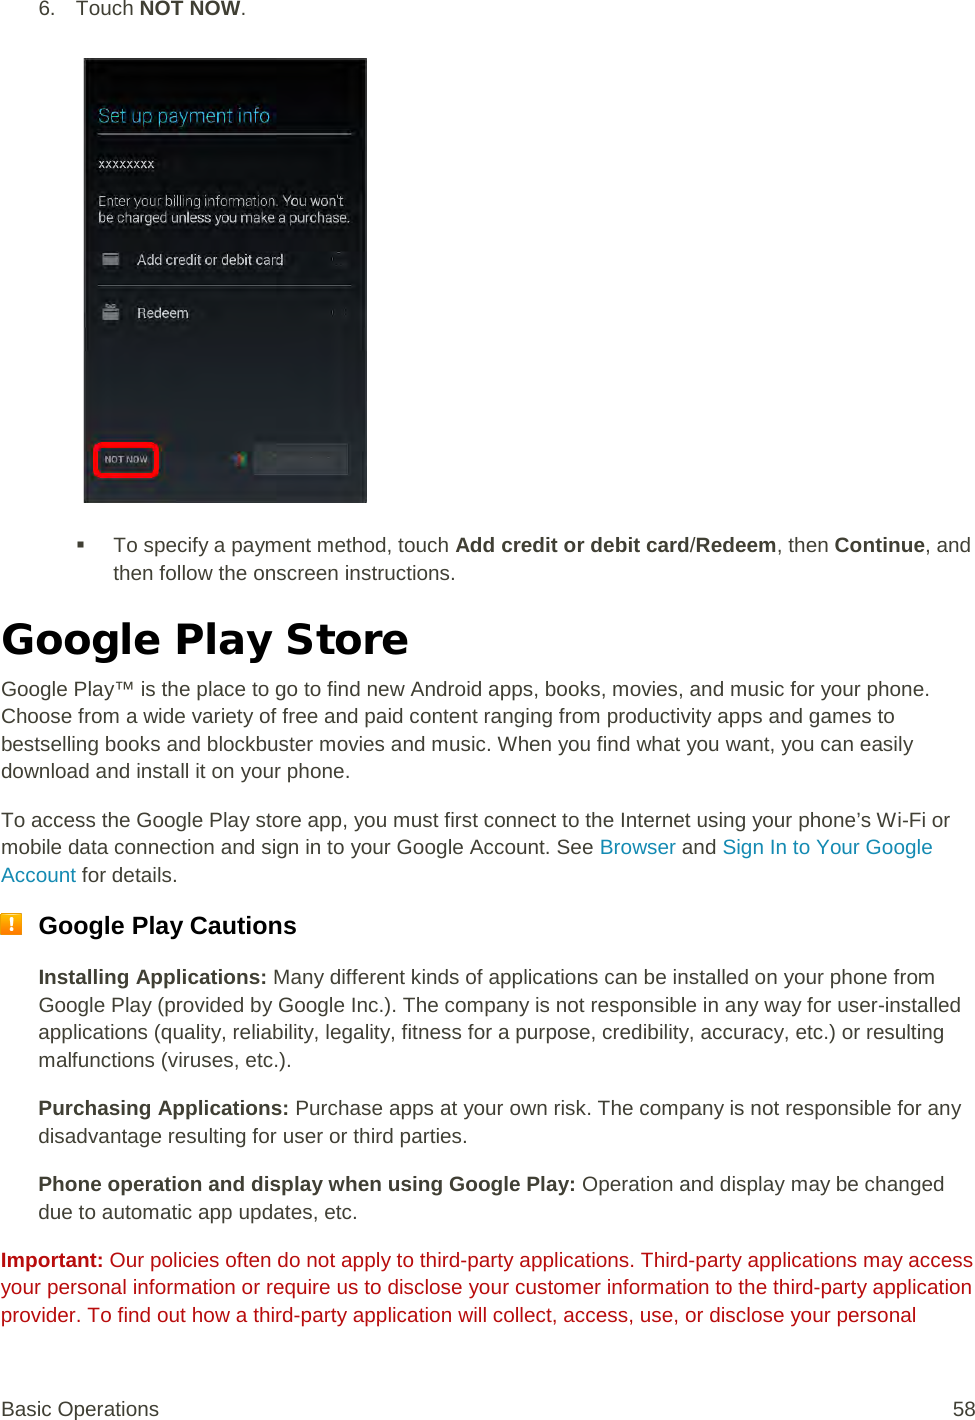 6. Touch NOT NOW.    To specify a payment method, touch Add credit or debit card/Redeem, then Continue, and then follow the onscreen instructions. Google Play Store  Google Play™ is the place to go to find new Android apps, books, movies, and music for your phone. Choose from a wide variety of free and paid content ranging from productivity apps and games to bestselling books and blockbuster movies and music. When you find what you want, you can easily download and install it on your phone. To access the Google Play store app, you must first connect to the Internet using your phone’s Wi-Fi or mobile data connection and sign in to your Google Account. See Browser and Sign In to Your Google Account for details.  Google Play Cautions Installing Applications: Many different kinds of applications can be installed on your phone from Google Play (provided by Google Inc.). The company is not responsible in any way for user-installed applications (quality, reliability, legality, fitness for a purpose, credibility, accuracy, etc.) or resulting malfunctions (viruses, etc.). Purchasing Applications: Purchase apps at your own risk. The company is not responsible for any disadvantage resulting for user or third parties. Phone operation and display when using Google Play: Operation and display may be changed due to automatic app updates, etc. Important: Our policies often do not apply to third-party applications. Third-party applications may access your personal information or require us to disclose your customer information to the third-party application provider. To find out how a third-party application will collect, access, use, or disclose your personal Basic Operations 58 